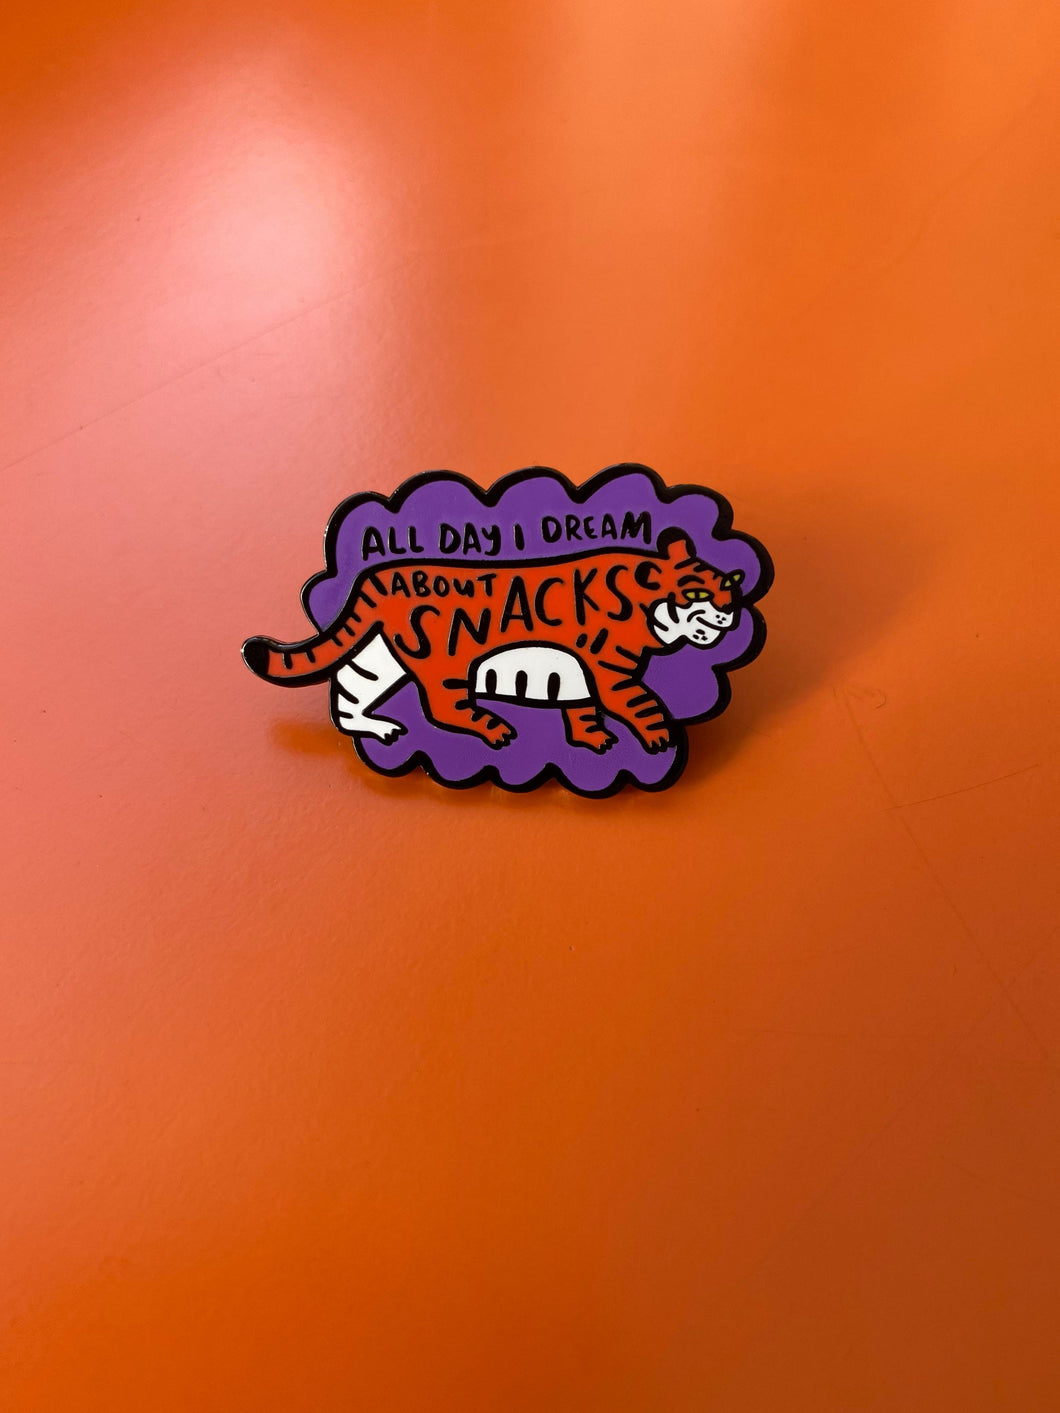 All day I dream about snacks Tiger - illustrated enamel pin / brooch / lapel pin - Fernandes Makes